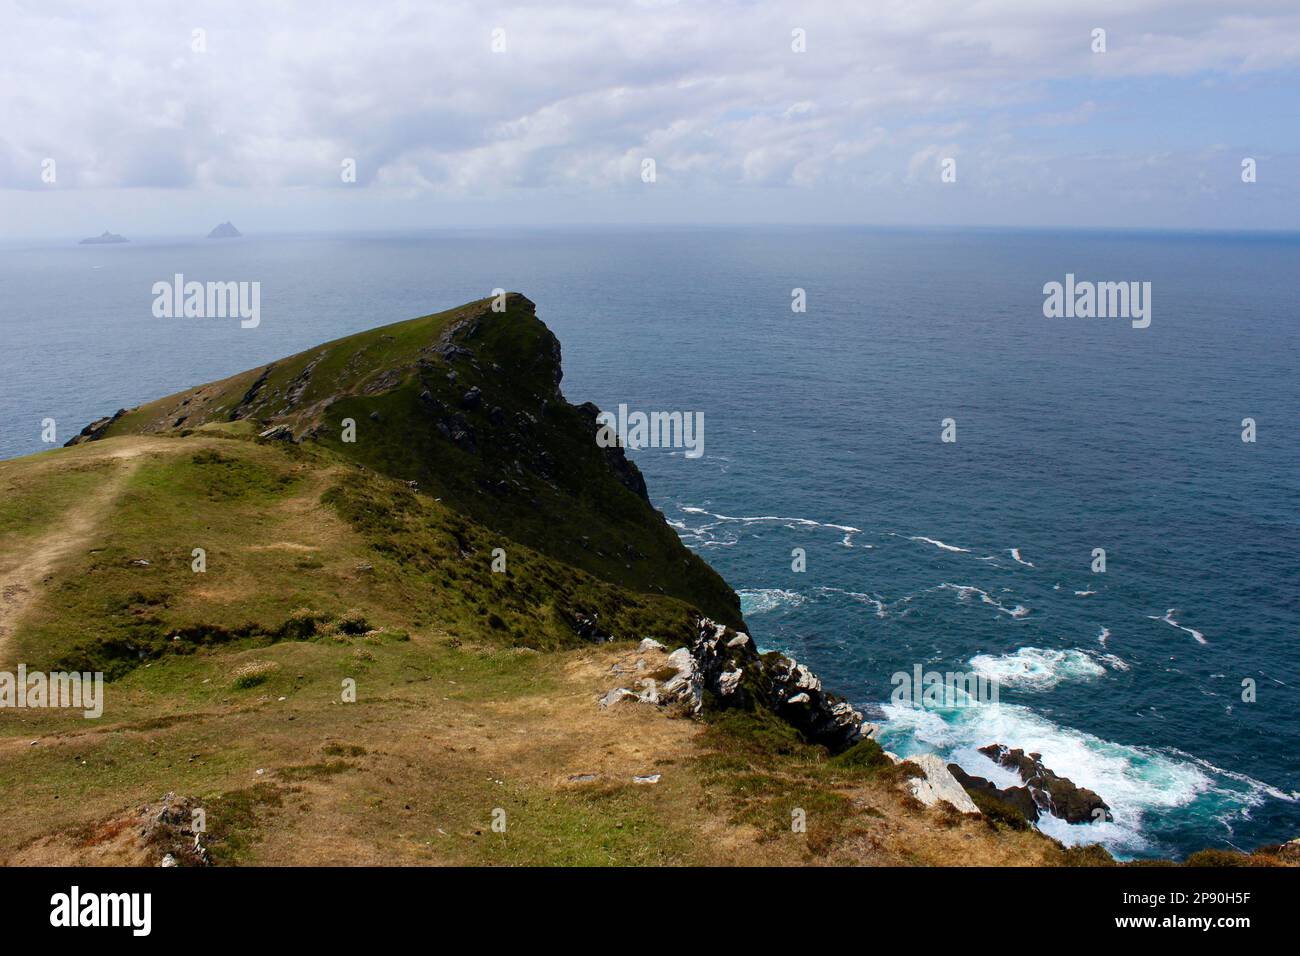 The photo was taken in the summer during a trip to Ireland, the photo represents a cliff overlooking the sea. Stock Photo